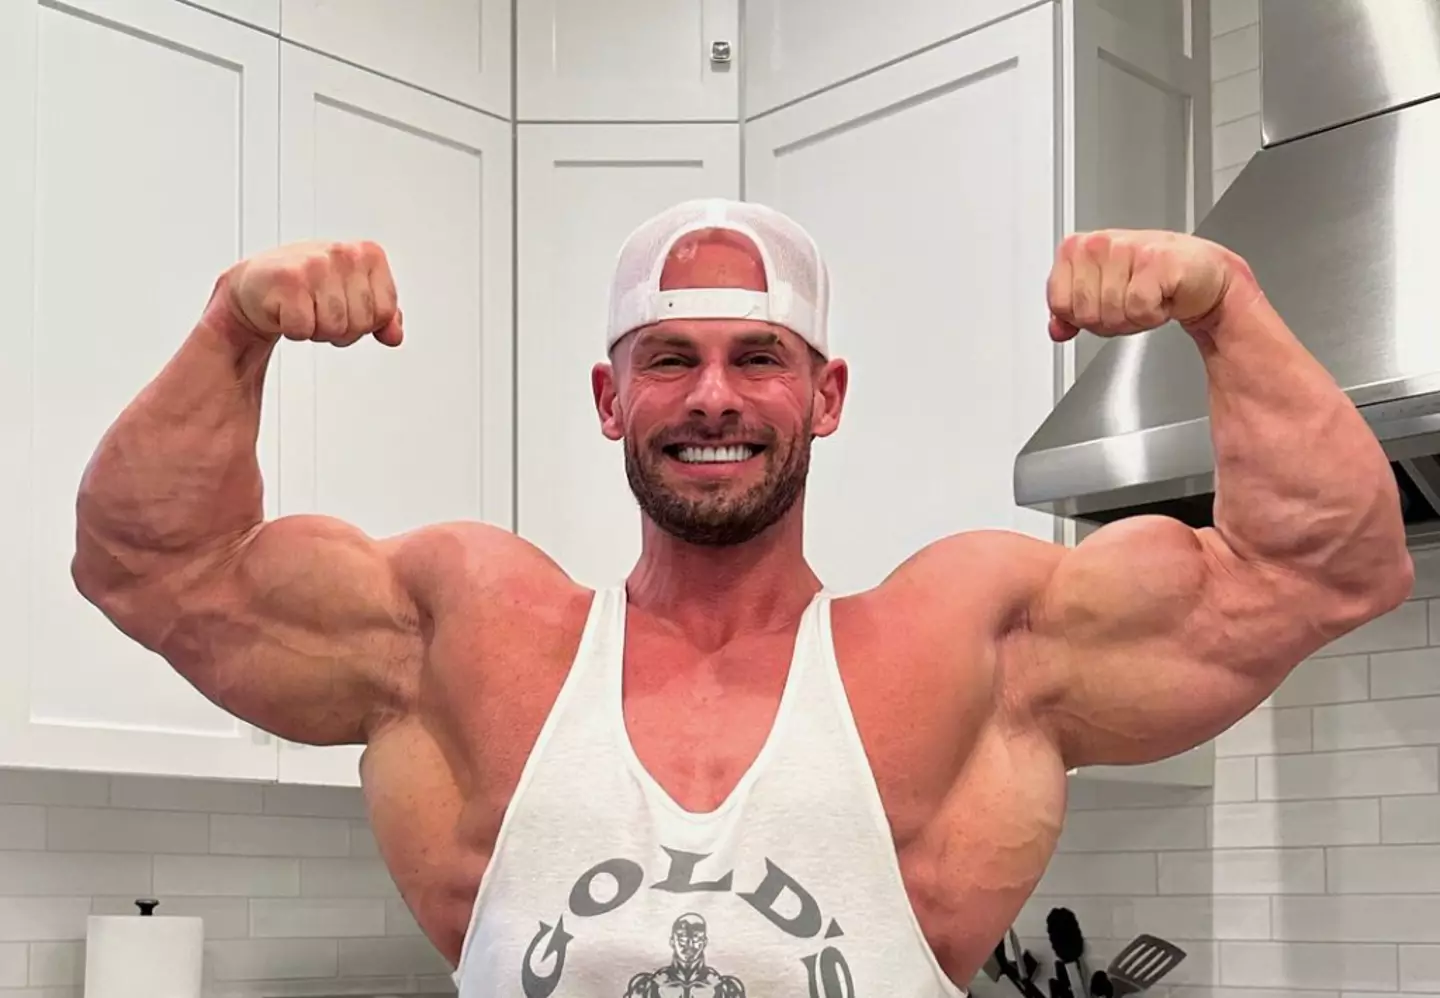 Joey Swoll is known for spreading gym positivity. @joeyswoll/Instagram